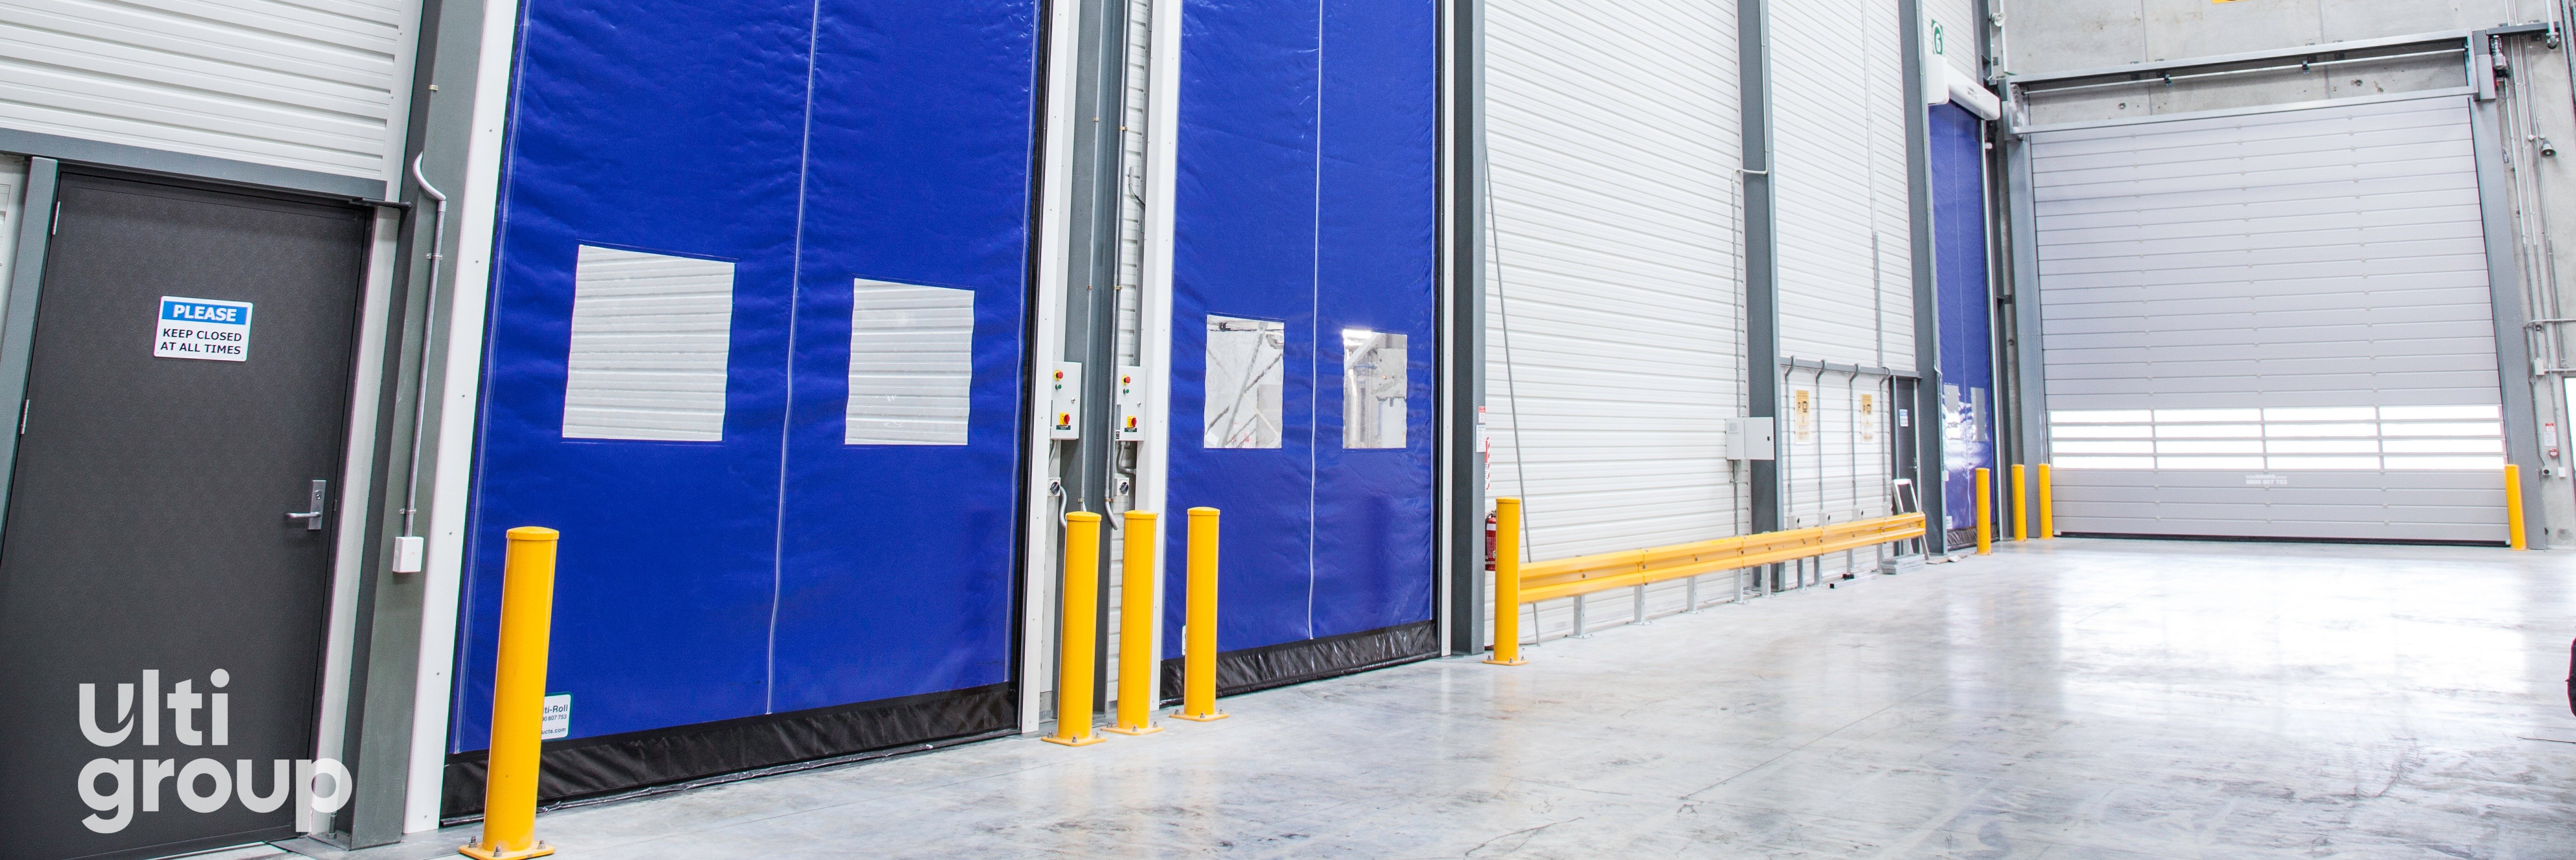 1311-Ulti Roll Rapid Acting Door with Vision Panels and Bollard Protection - Image Holdings (10)